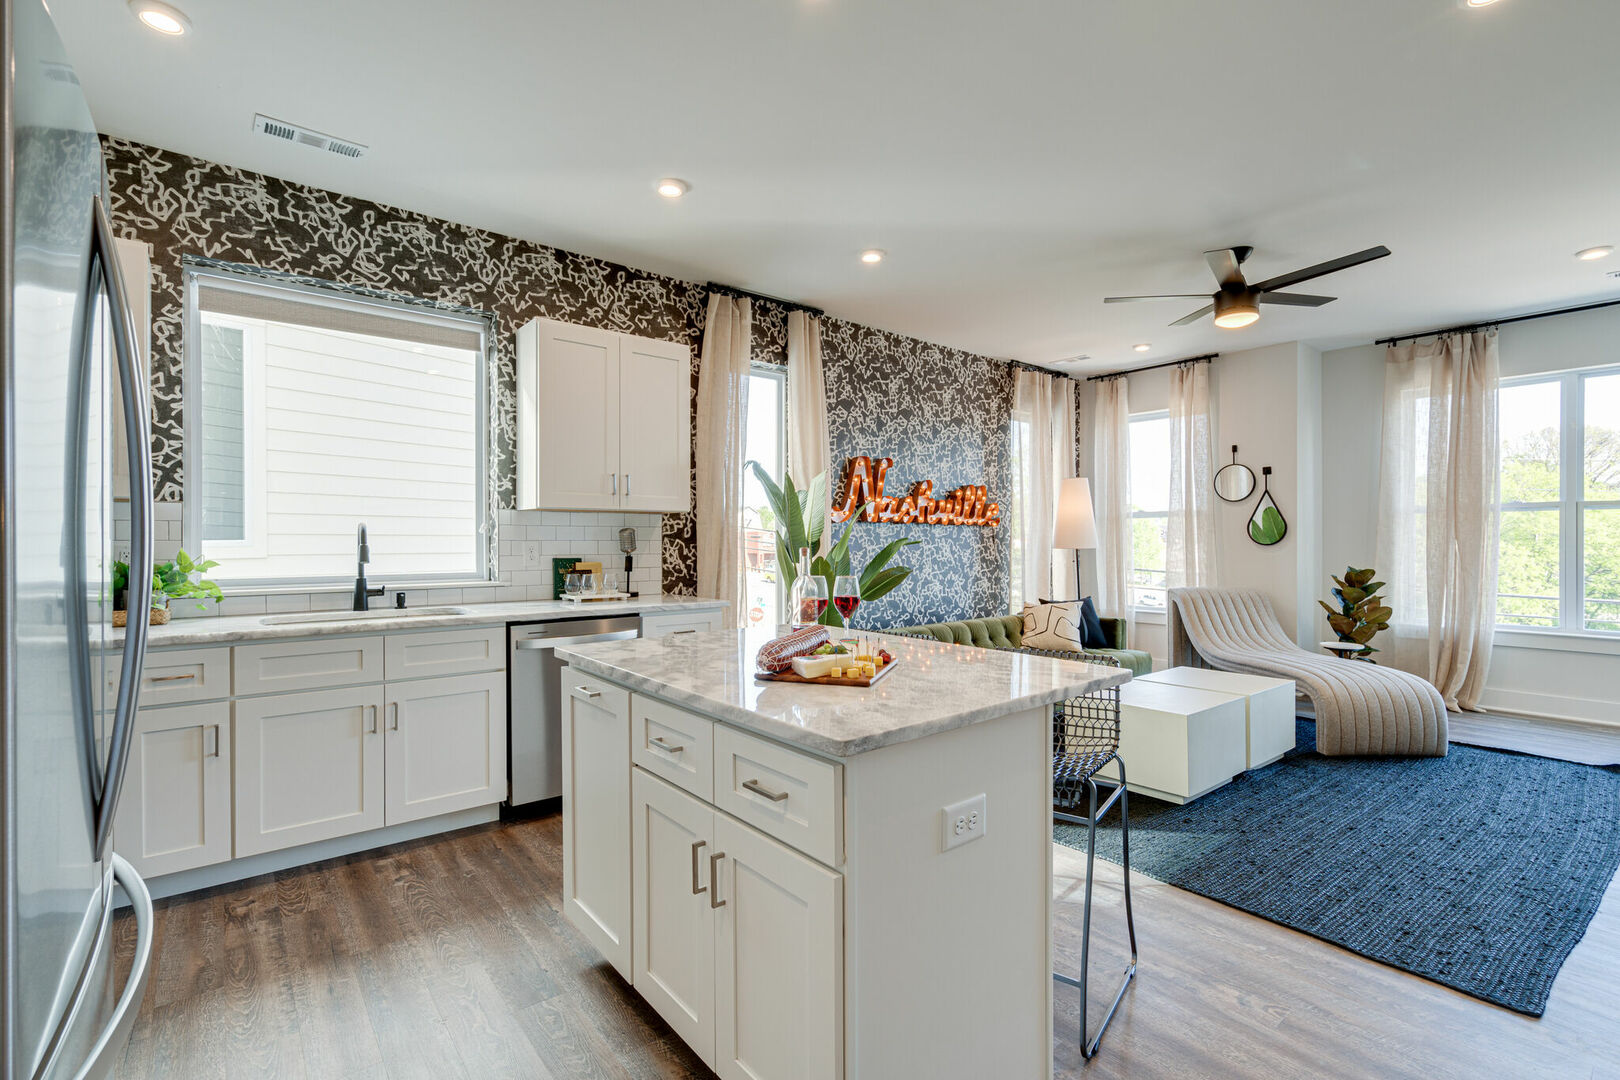 2nd Unit, 2nd Floor: Open kitchen with stainless steel appliances, large island, breakfast bar seating, and is fully equipped with your basic cooking essentials.